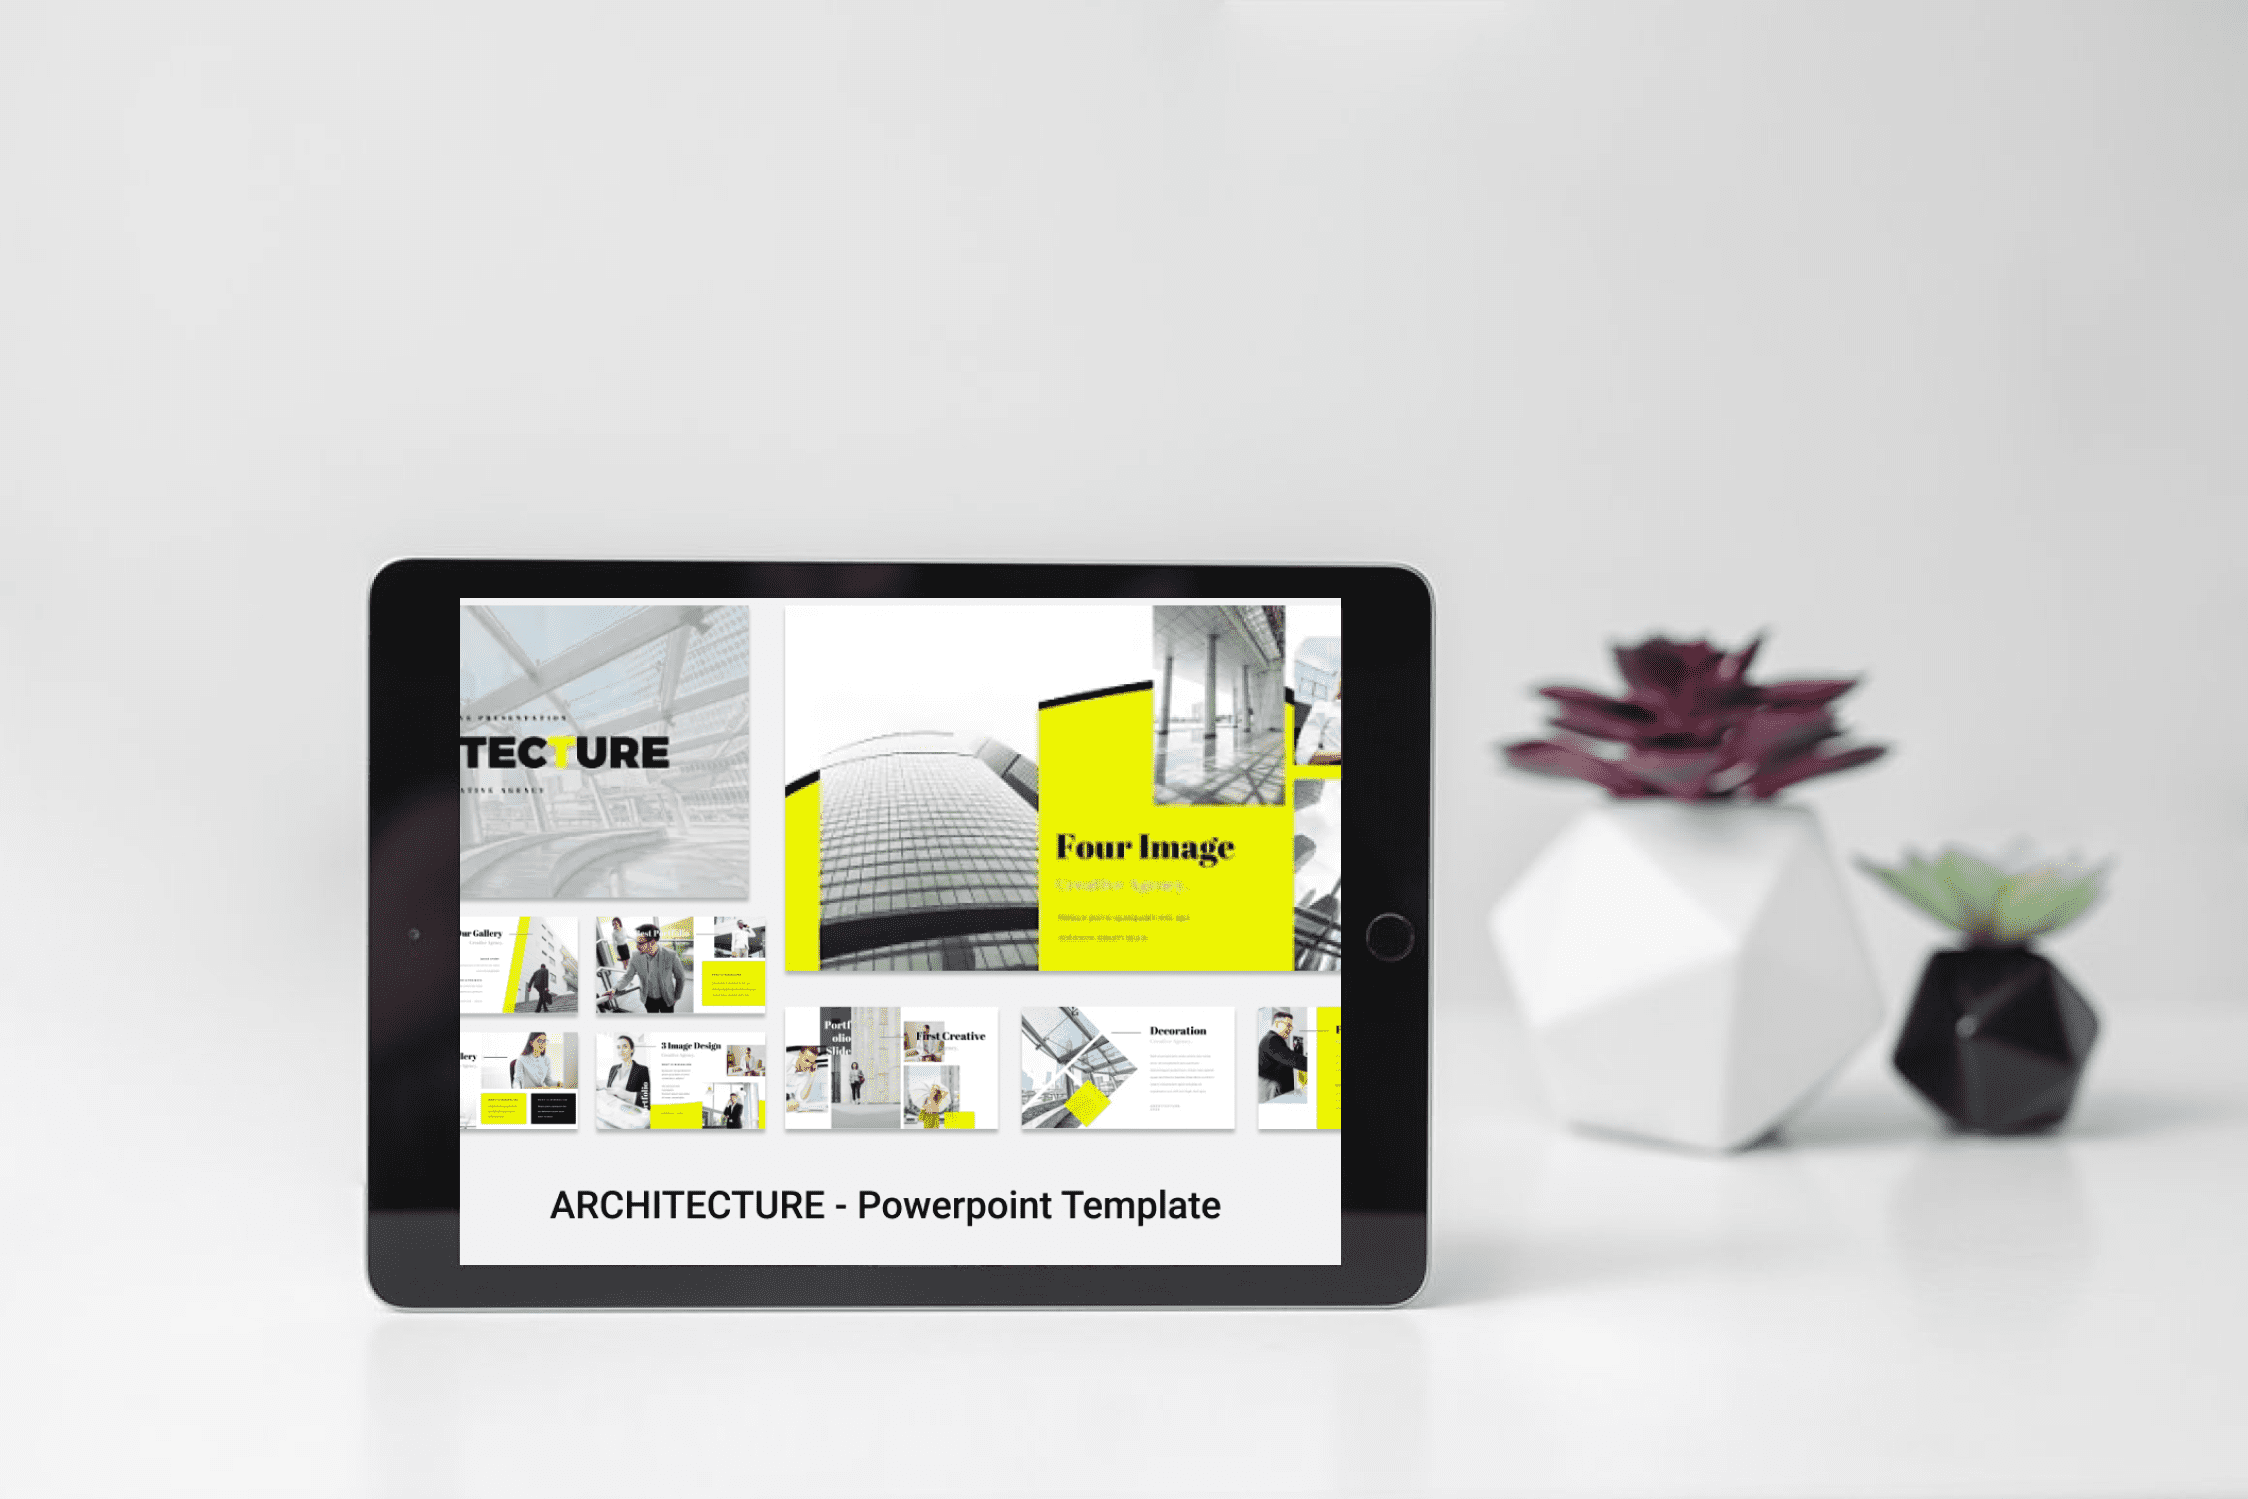 ARCHITECTURE - Powerpoint Template -tablet.